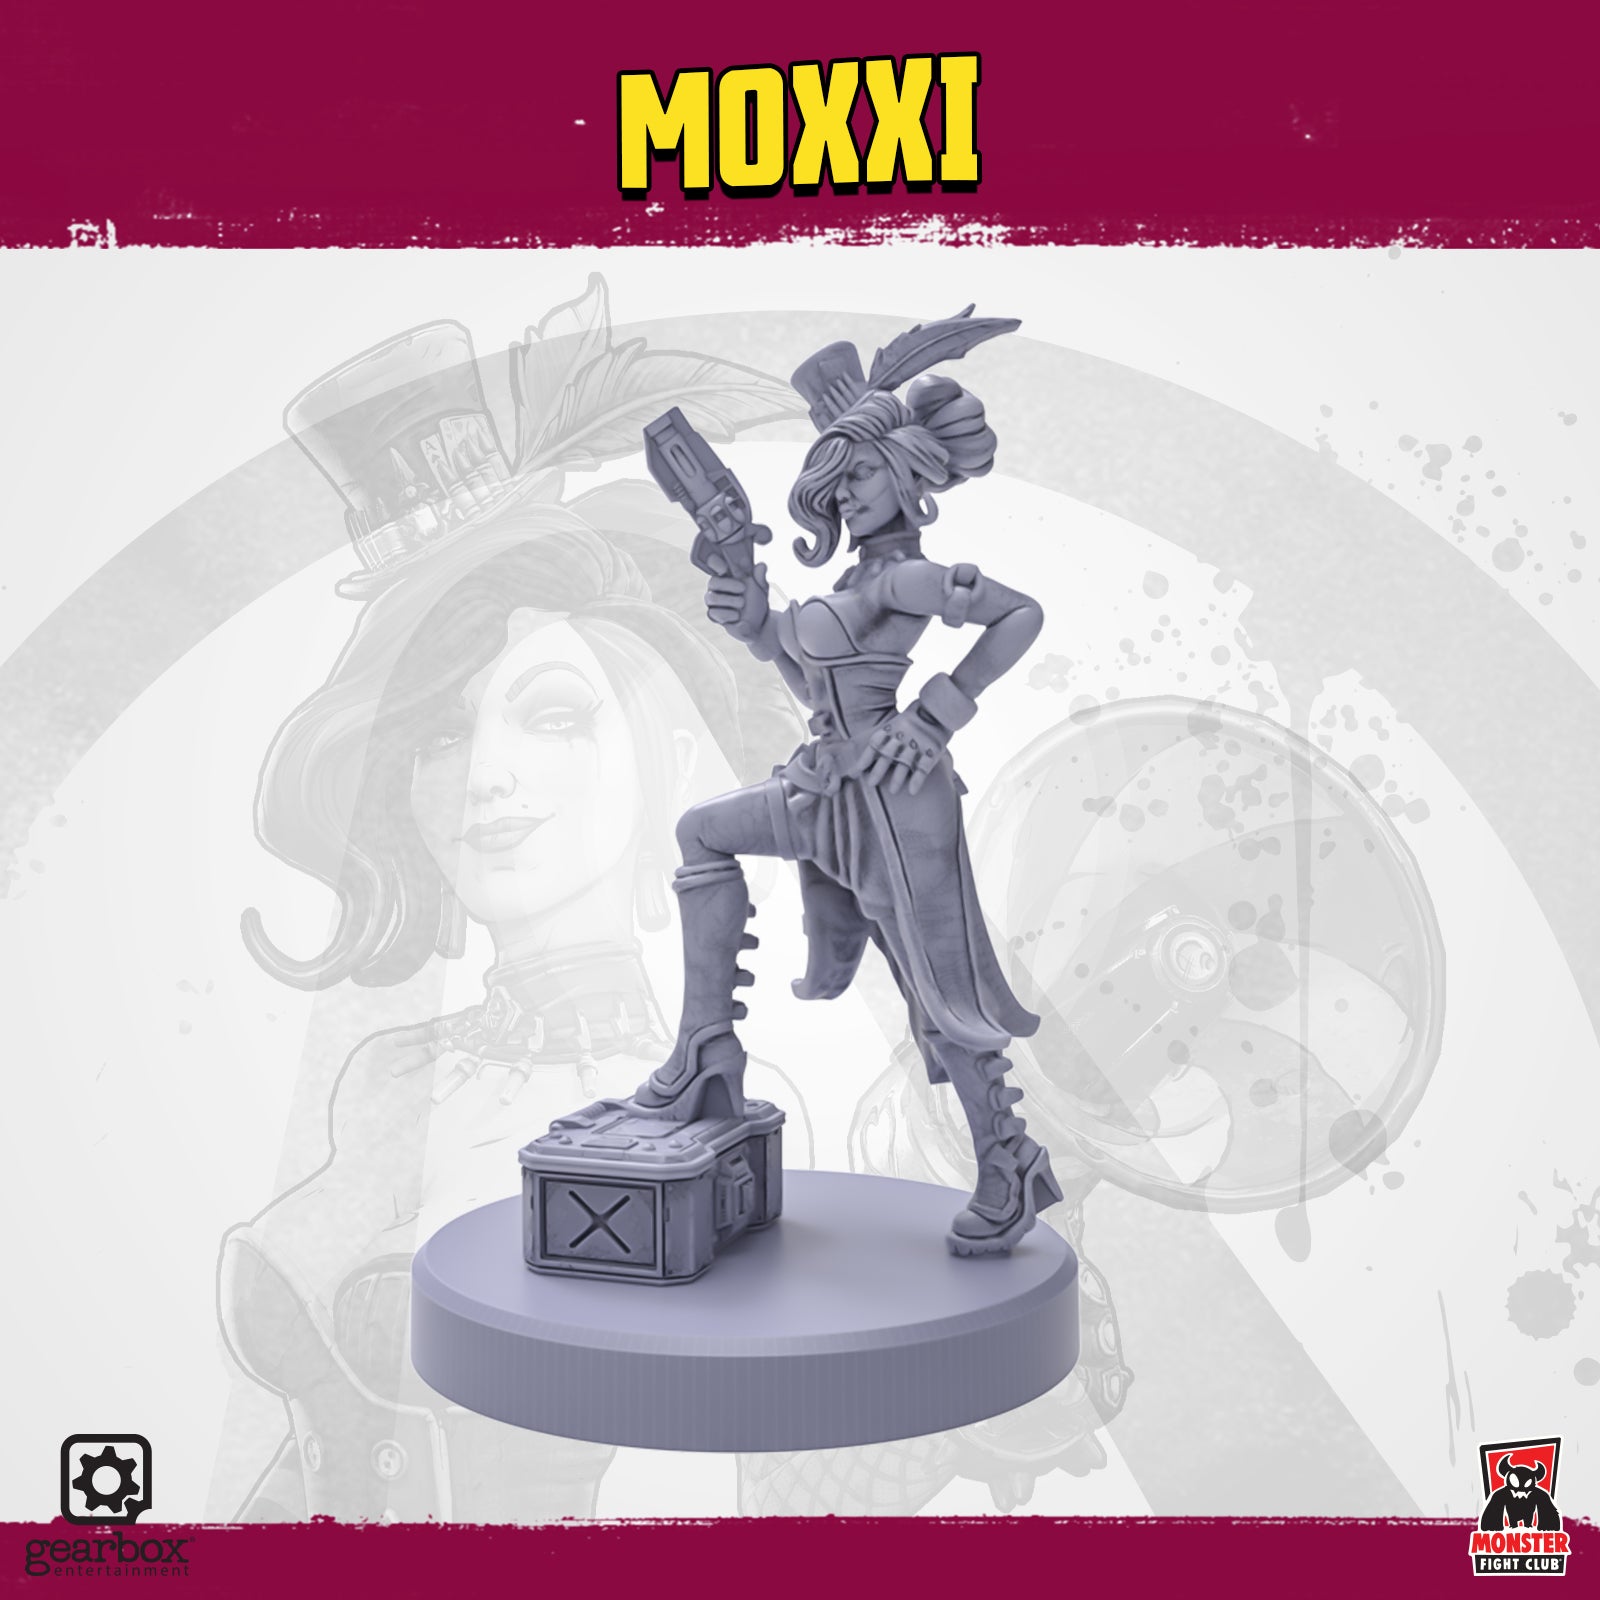 Mister Torgue's Arena of Badassery™: Moxxi